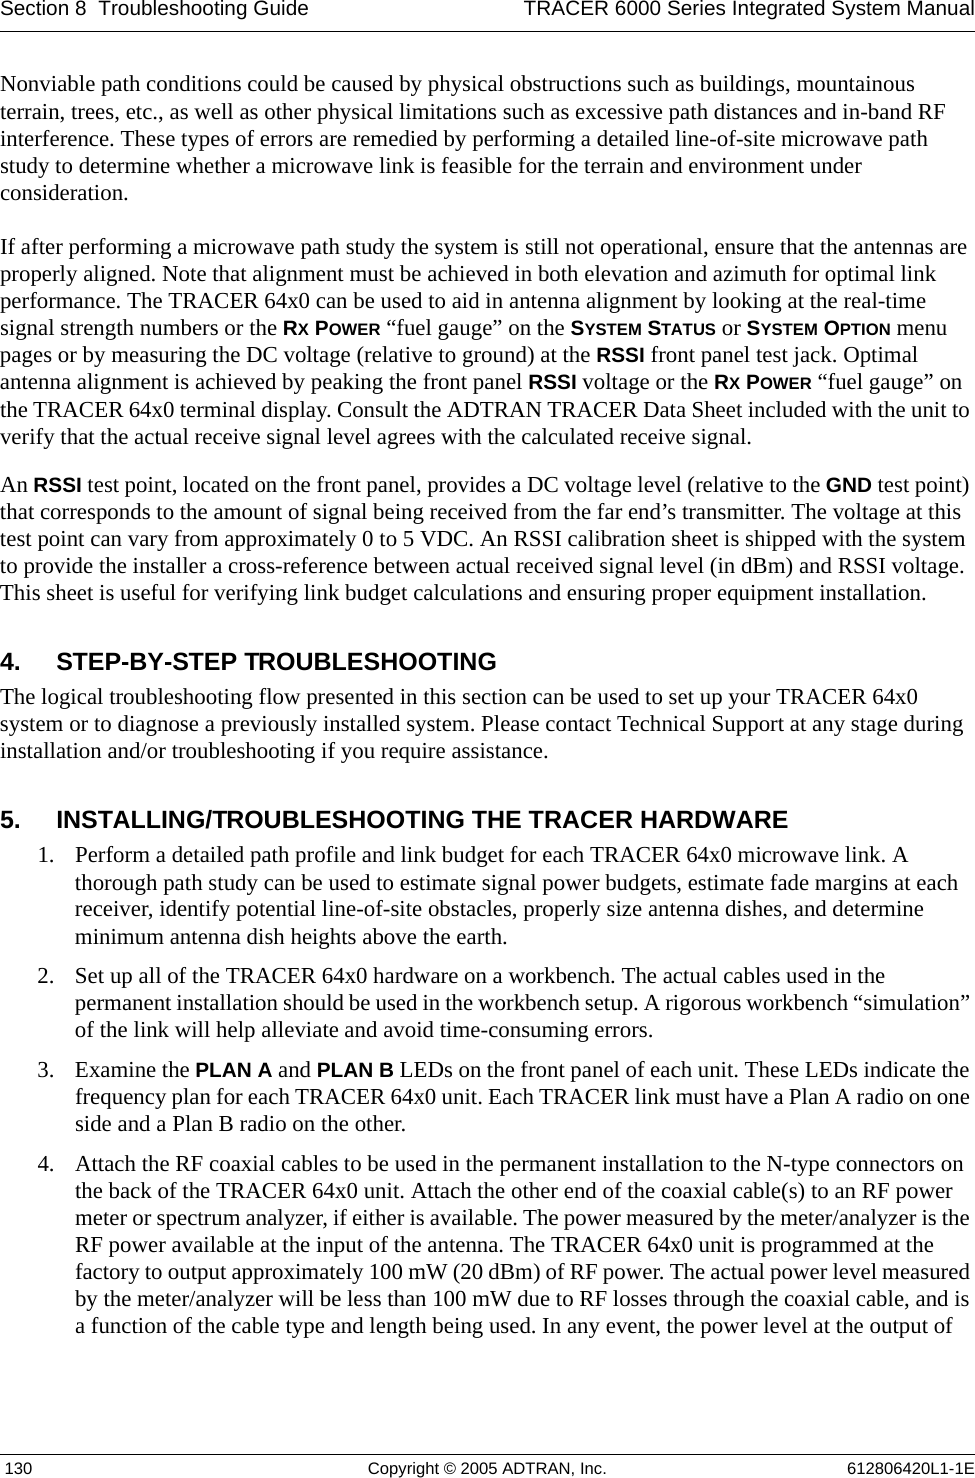 Section 8  Troubleshooting Guide TRACER 6000 Series Integrated System Manual 130 Copyright © 2005 ADTRAN, Inc. 612806420L1-1ENonviable path conditions could be caused by physical obstructions such as buildings, mountainous terrain, trees, etc., as well as other physical limitations such as excessive path distances and in-band RF interference. These types of errors are remedied by performing a detailed line-of-site microwave path study to determine whether a microwave link is feasible for the terrain and environment under consideration.If after performing a microwave path study the system is still not operational, ensure that the antennas are properly aligned. Note that alignment must be achieved in both elevation and azimuth for optimal link performance. The TRACER 64x0 can be used to aid in antenna alignment by looking at the real-time signal strength numbers or the RX POWER “fuel gauge” on the SYSTEM STATUS or SYSTEM OPTION menu pages or by measuring the DC voltage (relative to ground) at the RSSI front panel test jack. Optimal antenna alignment is achieved by peaking the front panel RSSI voltage or the RX POWER “fuel gauge” on the TRACER 64x0 terminal display. Consult the ADTRAN TRACER Data Sheet included with the unit to verify that the actual receive signal level agrees with the calculated receive signal.An RSSI test point, located on the front panel, provides a DC voltage level (relative to the GND test point) that corresponds to the amount of signal being received from the far end’s transmitter. The voltage at this test point can vary from approximately 0 to 5 VDC. An RSSI calibration sheet is shipped with the system to provide the installer a cross-reference between actual received signal level (in dBm) and RSSI voltage. This sheet is useful for verifying link budget calculations and ensuring proper equipment installation.4. STEP-BY-STEP TROUBLESHOOTINGThe logical troubleshooting flow presented in this section can be used to set up your TRACER 64x0 system or to diagnose a previously installed system. Please contact Technical Support at any stage during installation and/or troubleshooting if you require assistance.5. INSTALLING/TROUBLESHOOTING THE TRACER HARDWARE1. Perform a detailed path profile and link budget for each TRACER 64x0 microwave link. A thorough path study can be used to estimate signal power budgets, estimate fade margins at each receiver, identify potential line-of-site obstacles, properly size antenna dishes, and determine minimum antenna dish heights above the earth.2. Set up all of the TRACER 64x0 hardware on a workbench. The actual cables used in the permanent installation should be used in the workbench setup. A rigorous workbench “simulation” of the link will help alleviate and avoid time-consuming errors.3. Examine the PLAN A and PLAN B LEDs on the front panel of each unit. These LEDs indicate the frequency plan for each TRACER 64x0 unit. Each TRACER link must have a Plan A radio on one side and a Plan B radio on the other.4. Attach the RF coaxial cables to be used in the permanent installation to the N-type connectors on the back of the TRACER 64x0 unit. Attach the other end of the coaxial cable(s) to an RF power meter or spectrum analyzer, if either is available. The power measured by the meter/analyzer is the RF power available at the input of the antenna. The TRACER 64x0 unit is programmed at the factory to output approximately 100 mW (20 dBm) of RF power. The actual power level measured by the meter/analyzer will be less than 100 mW due to RF losses through the coaxial cable, and is a function of the cable type and length being used. In any event, the power level at the output of 